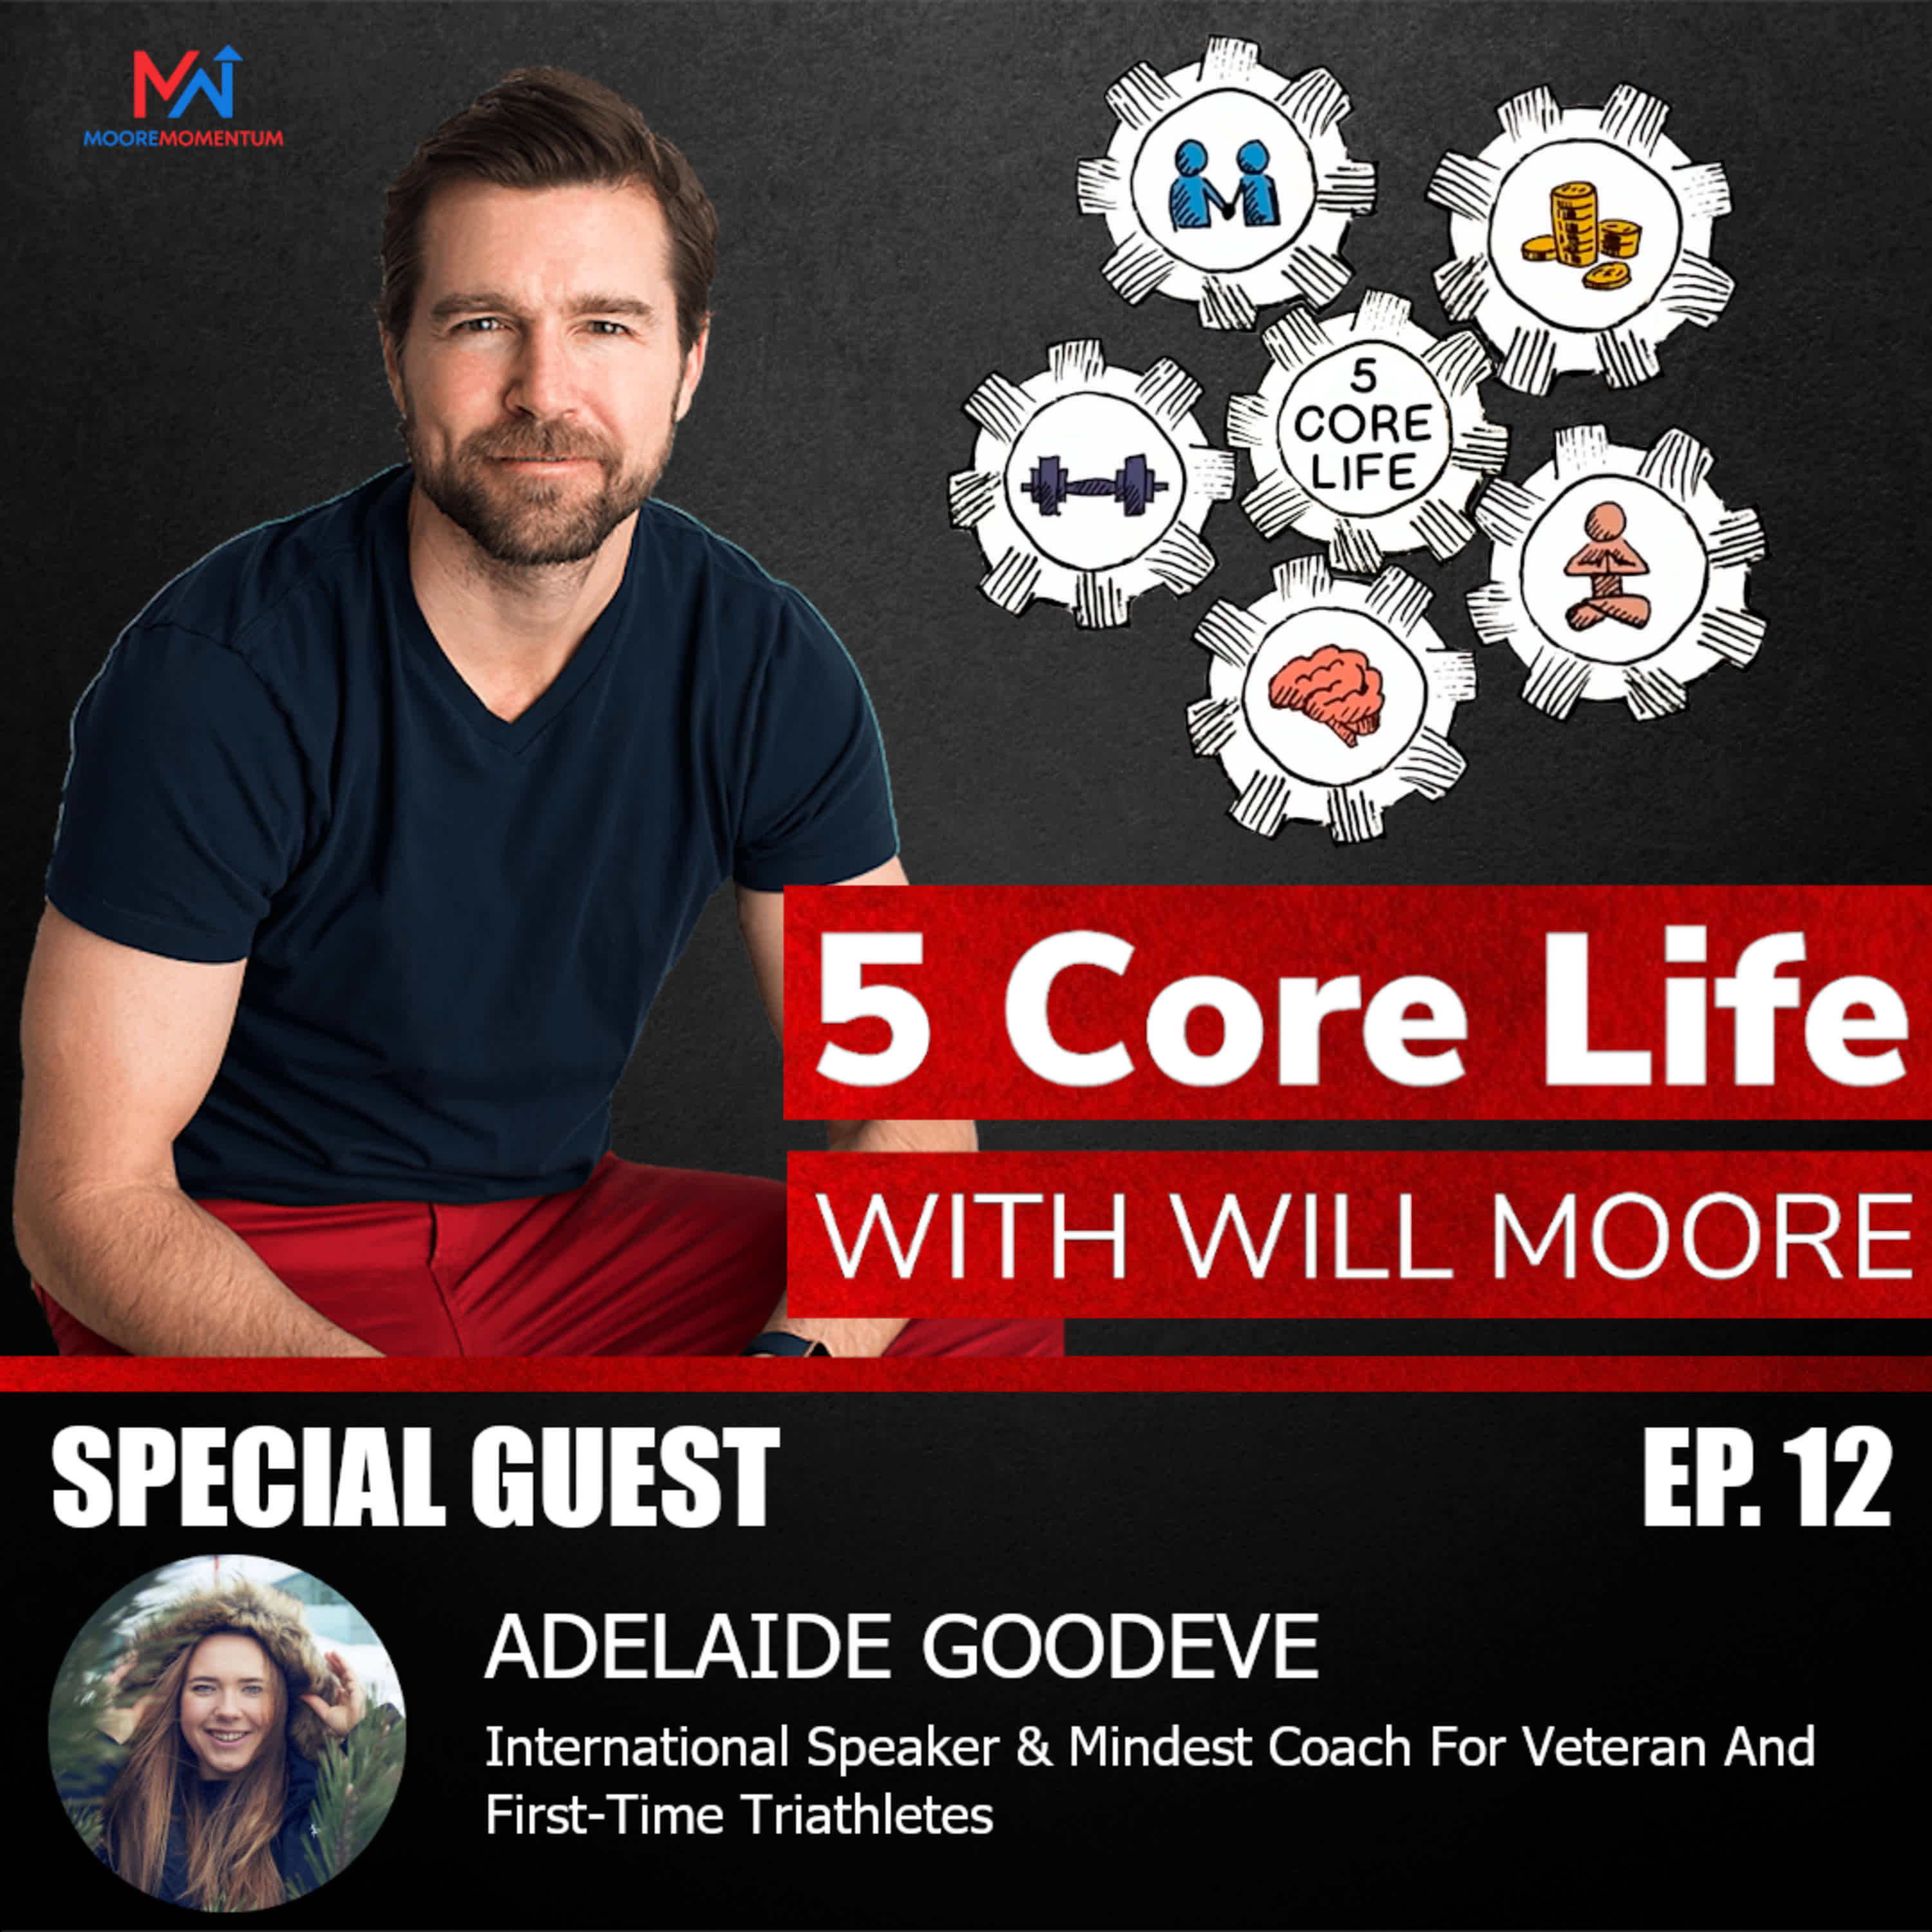 Are Your Mind & Body Working Together To Create Momentum & Endurance In Your Life - Join WIll Moore & Special Guest Adelaide Goodeve To Discuss How Using Neural Pathways Can Train Your Mind & Body